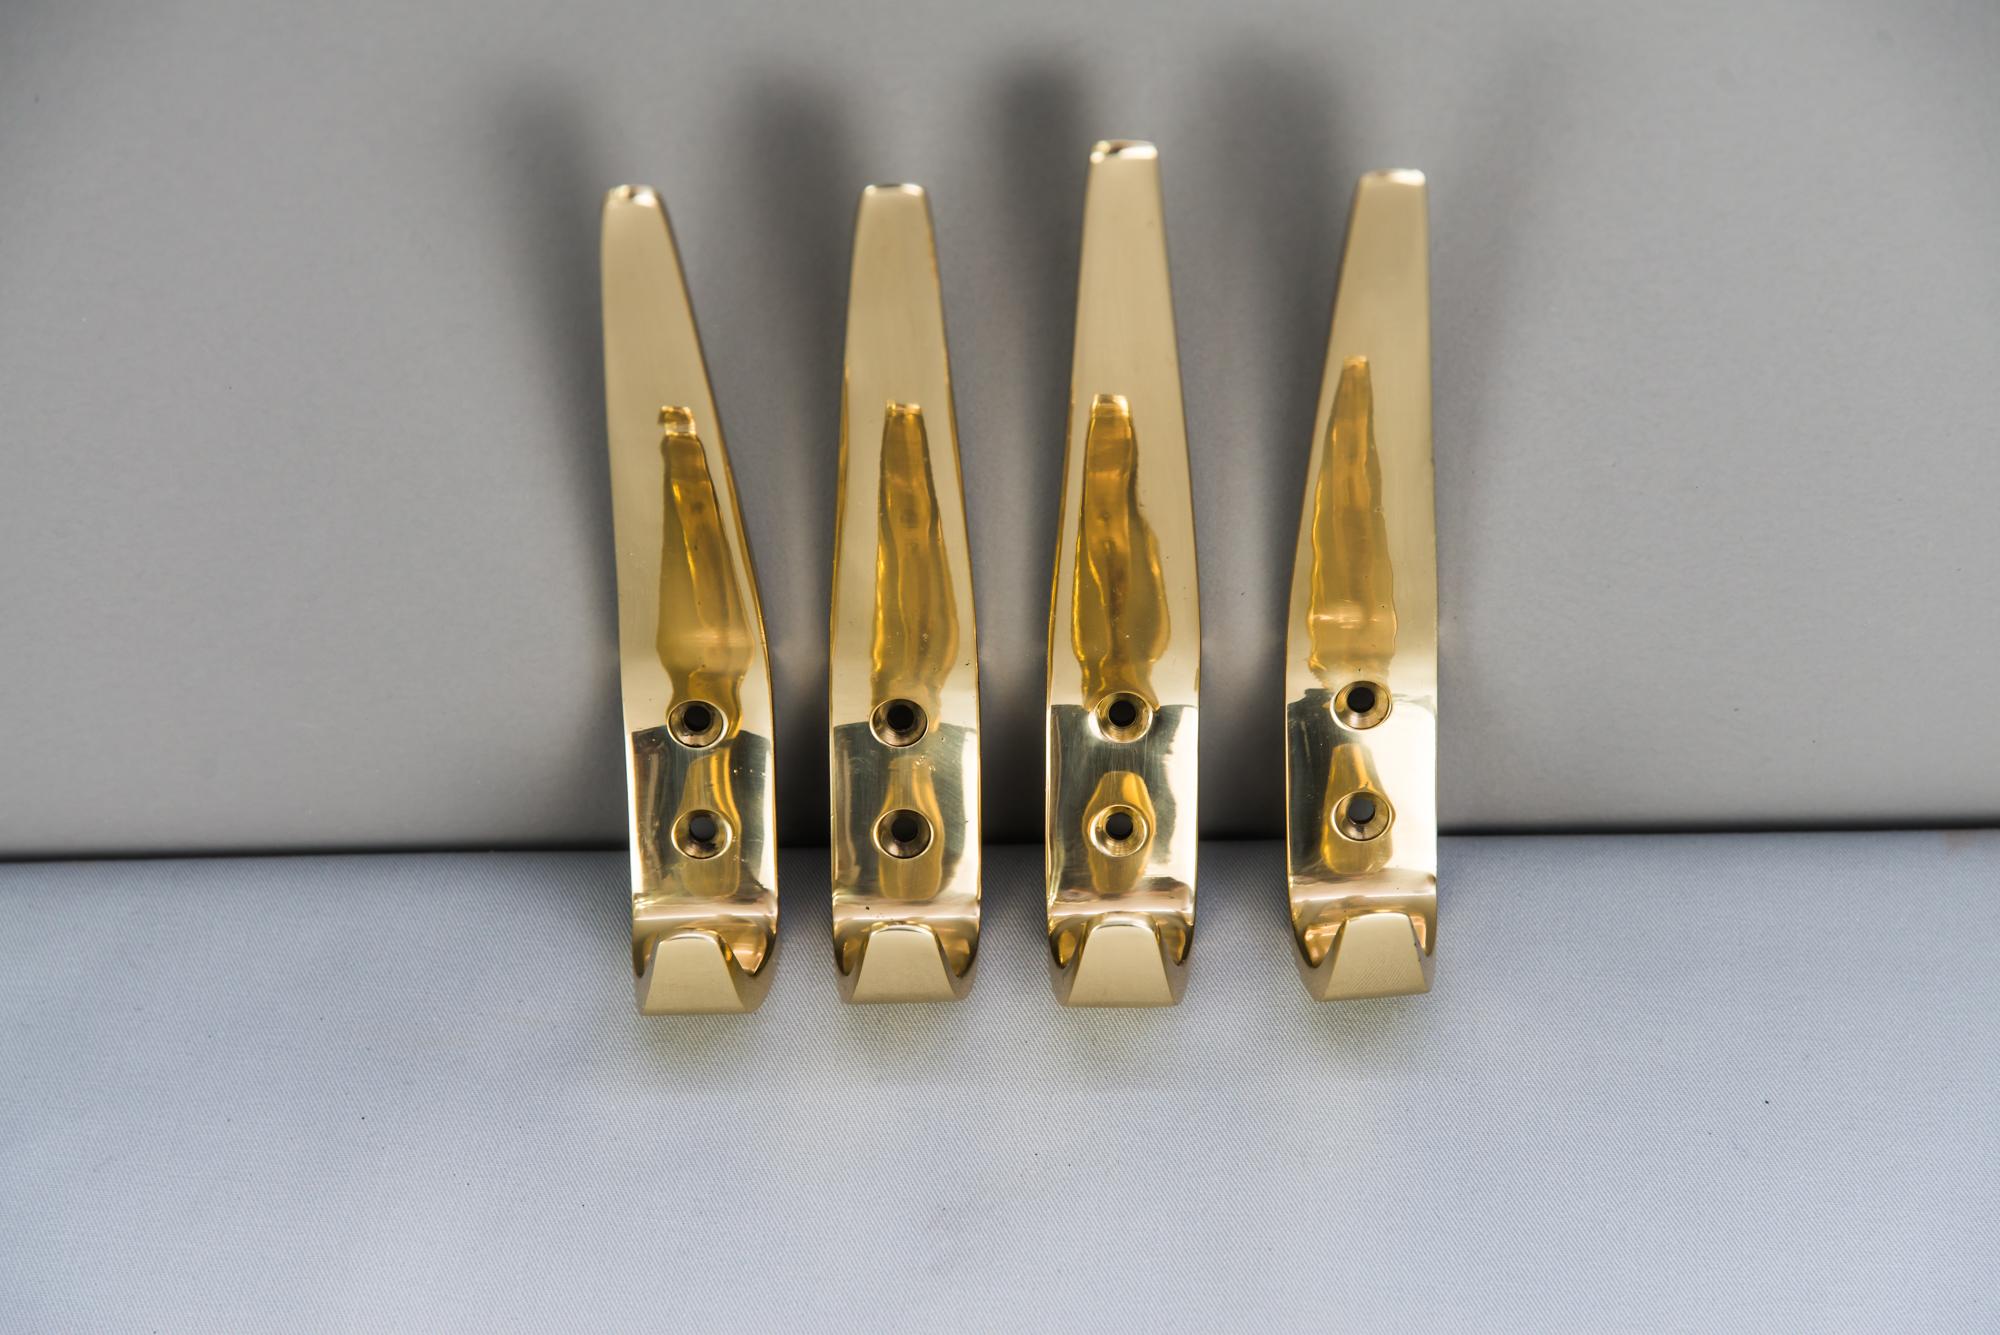 Hagenauer wall hooks, circa 1950s
Polished and stove enamelled.